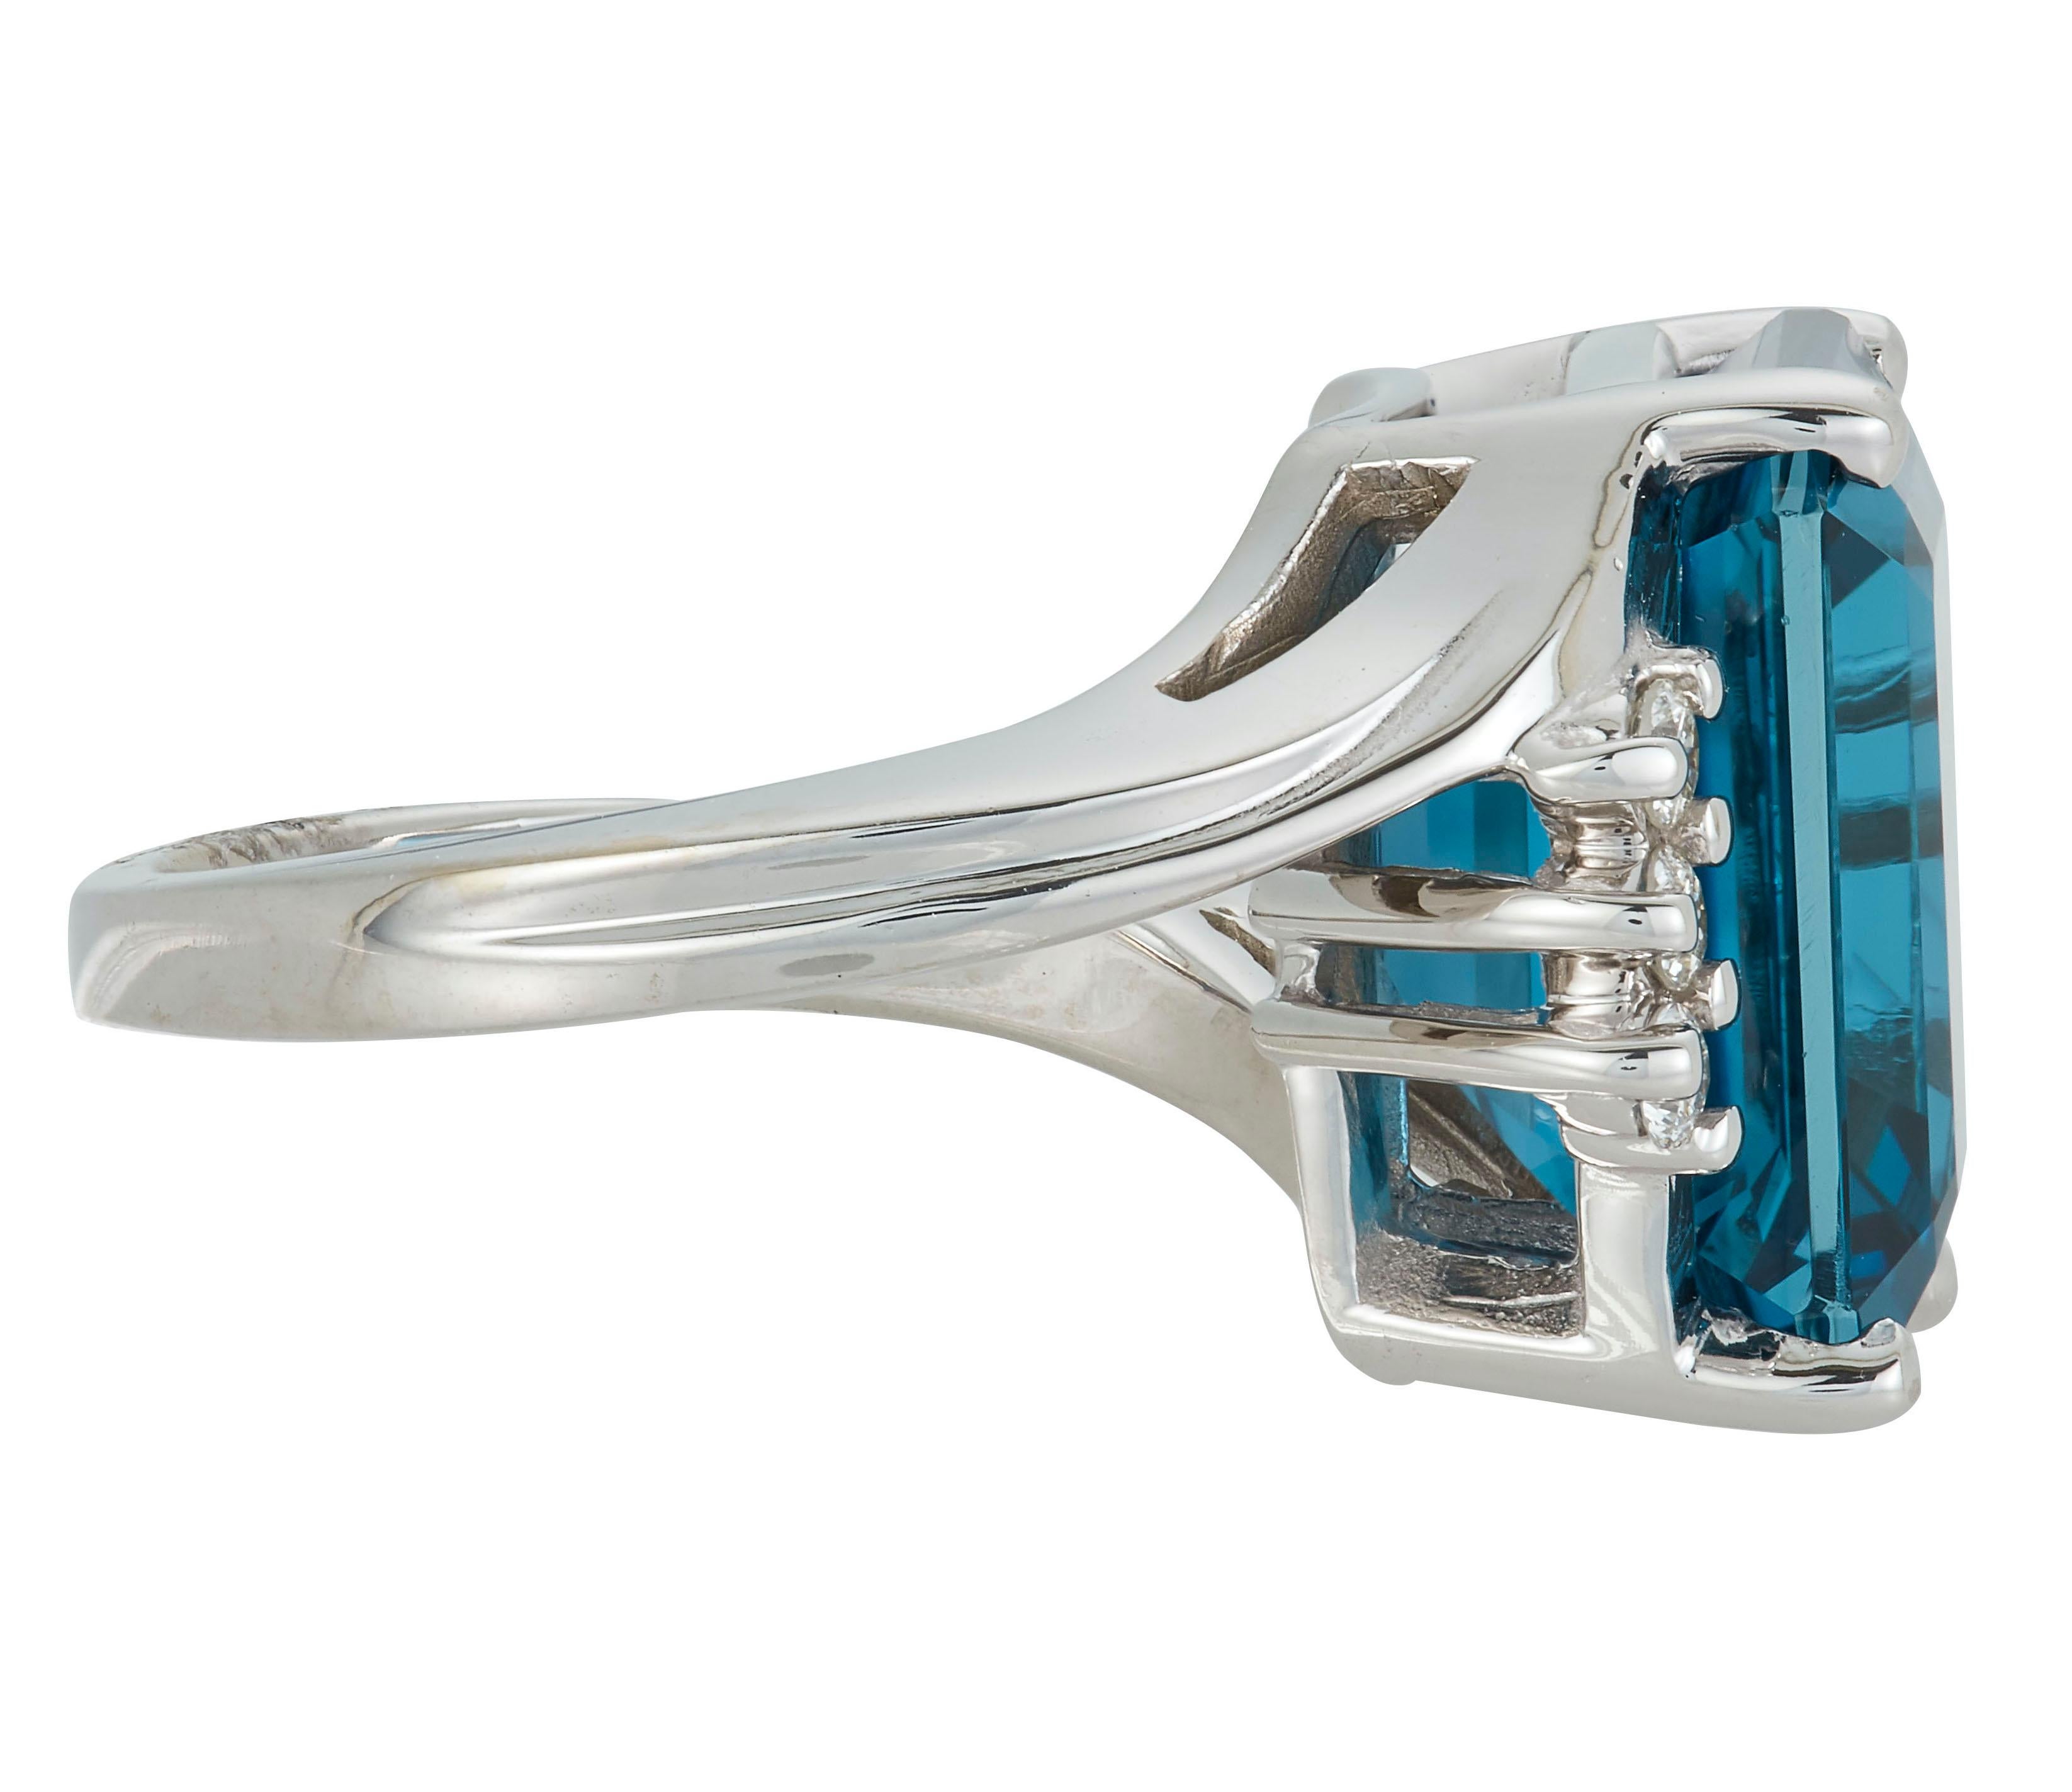 14K White Gold
1 Emerald Cut Blue Topaz at 11.66 Carats - Measuring 12 x 14 mm
6 Brilliant Round White Diamonds at 0.18 Carats - Color: H-I /Clarity: SI

Alberto offers complimentary sizing on all rings.

Fine one-of-a-kind craftsmanship meets